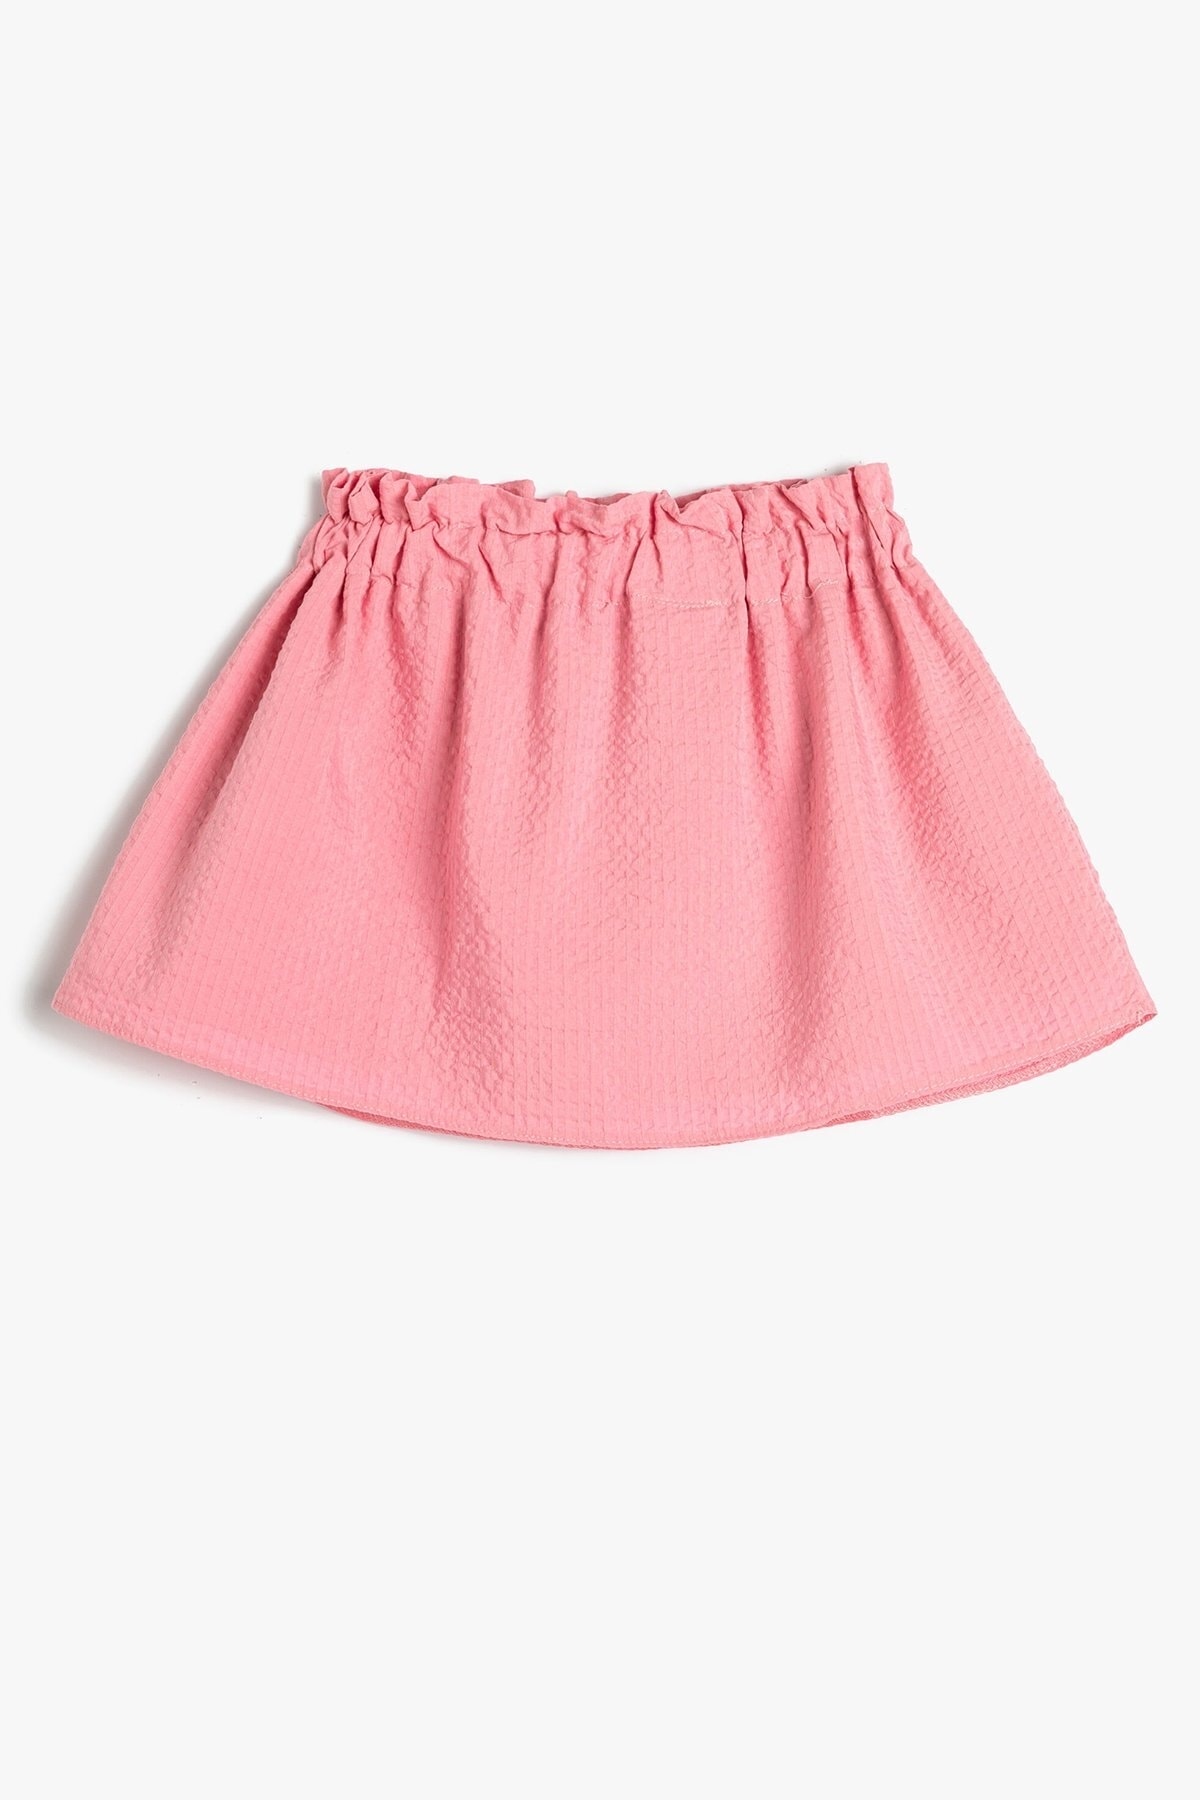 Levně Koton Baby Girl Skirt with Elastic Waist and Lined 3smg70002aw